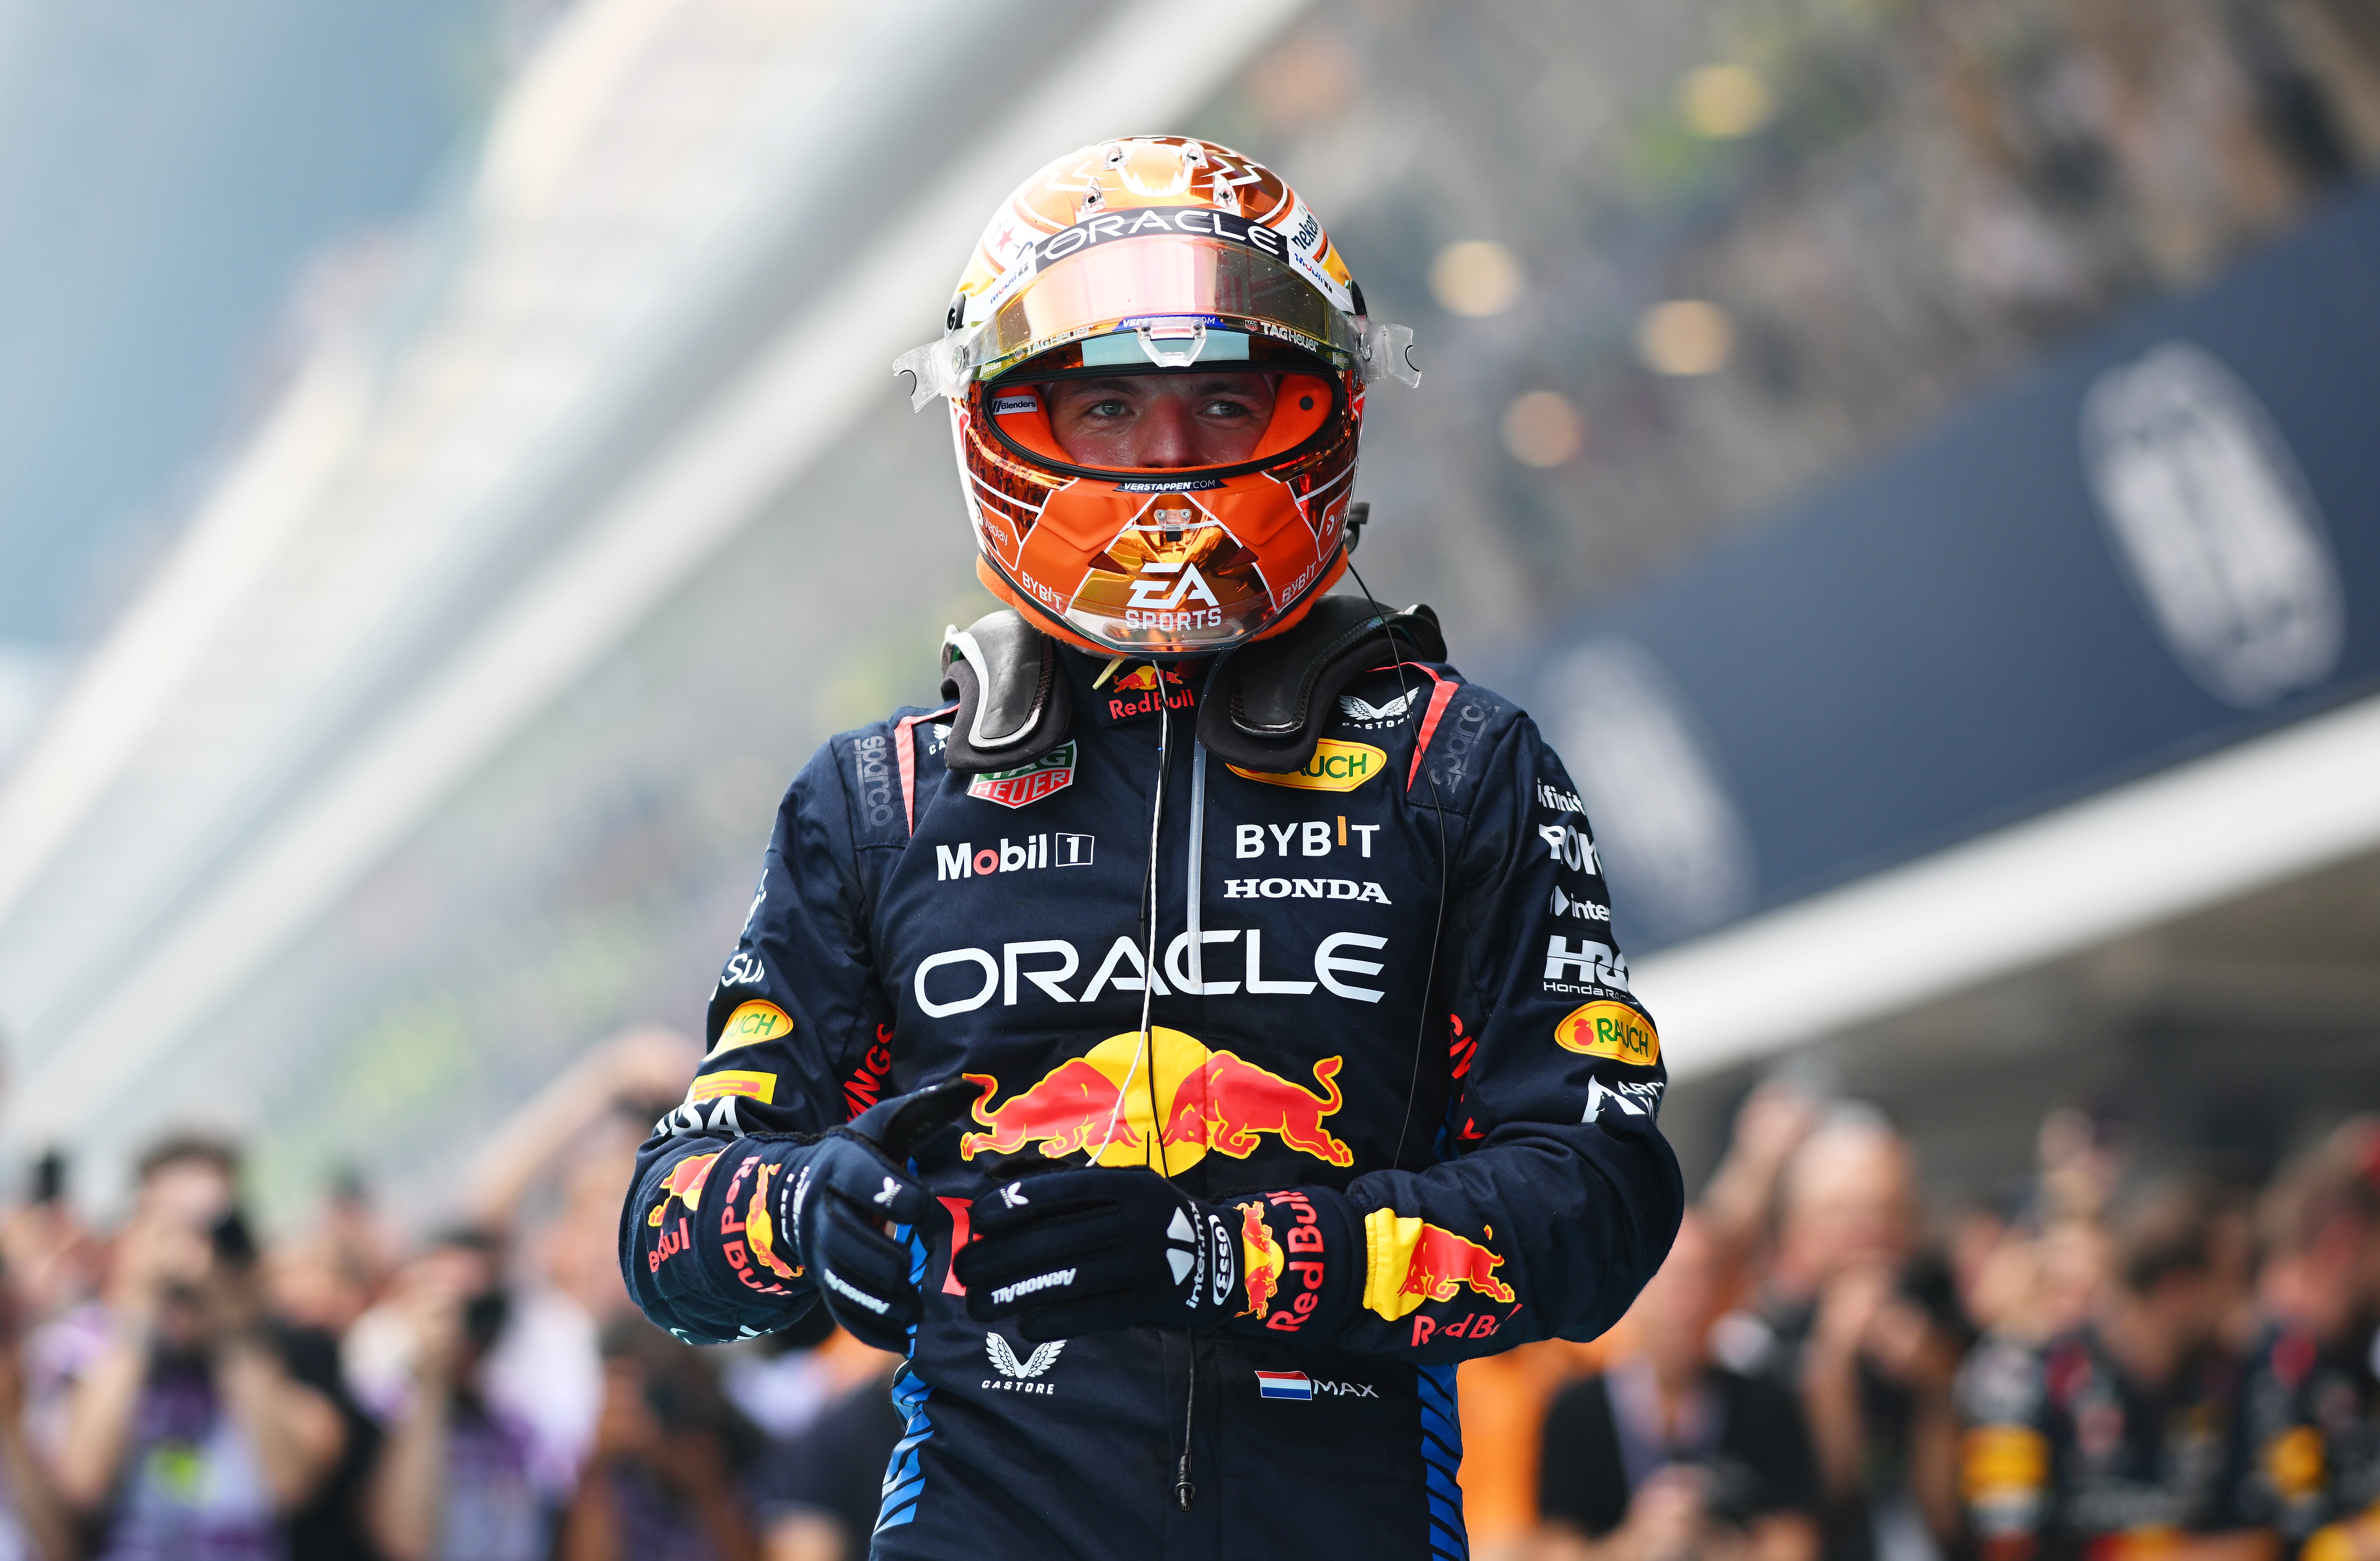 Max Verstappen claimed his third win from the last four races